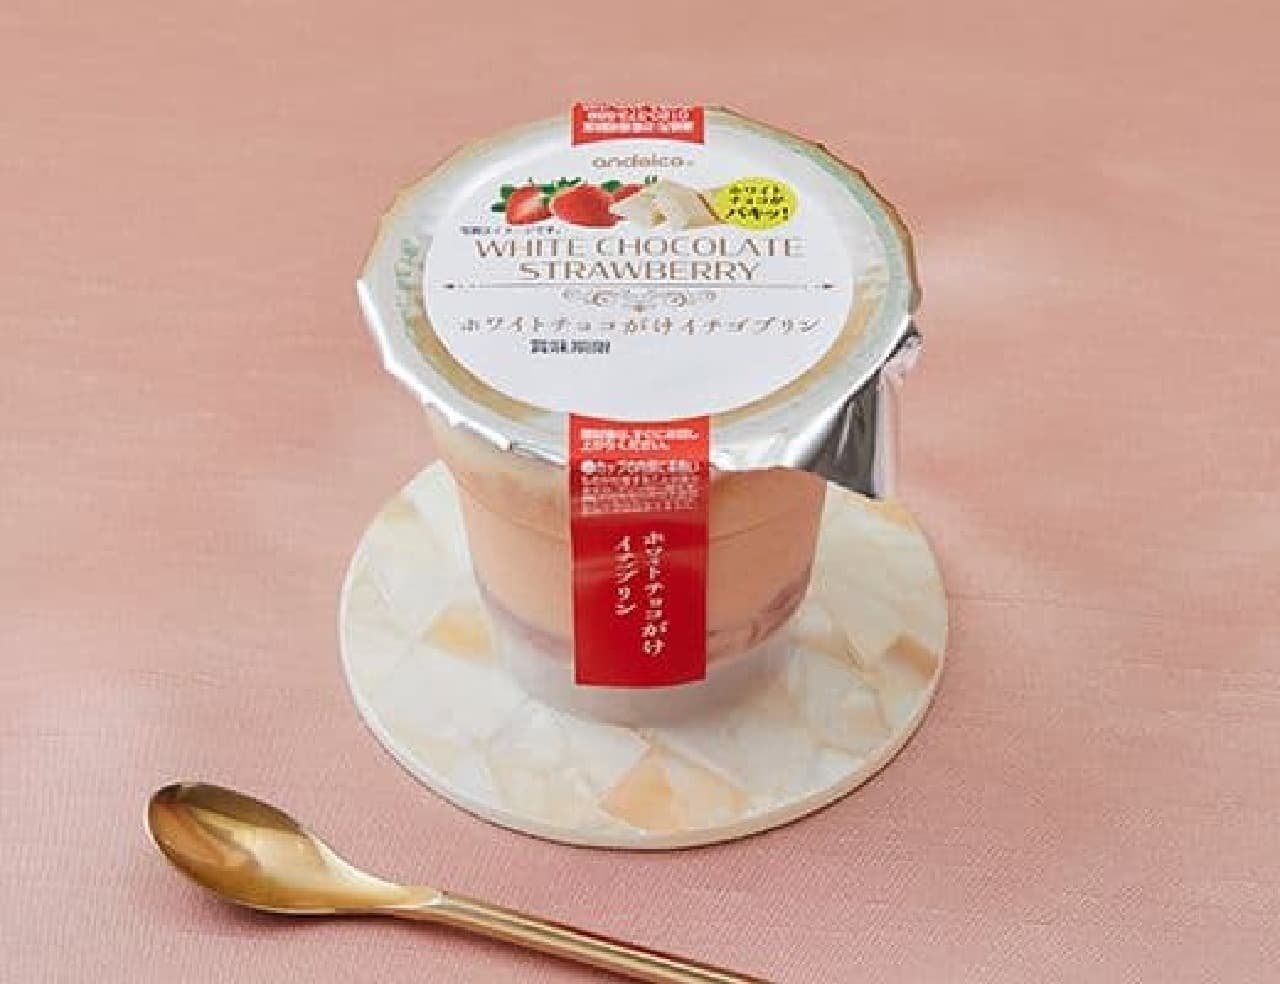 Lawson "and Eiko White Chocolate-Covered Strawberry Pudding 80g"